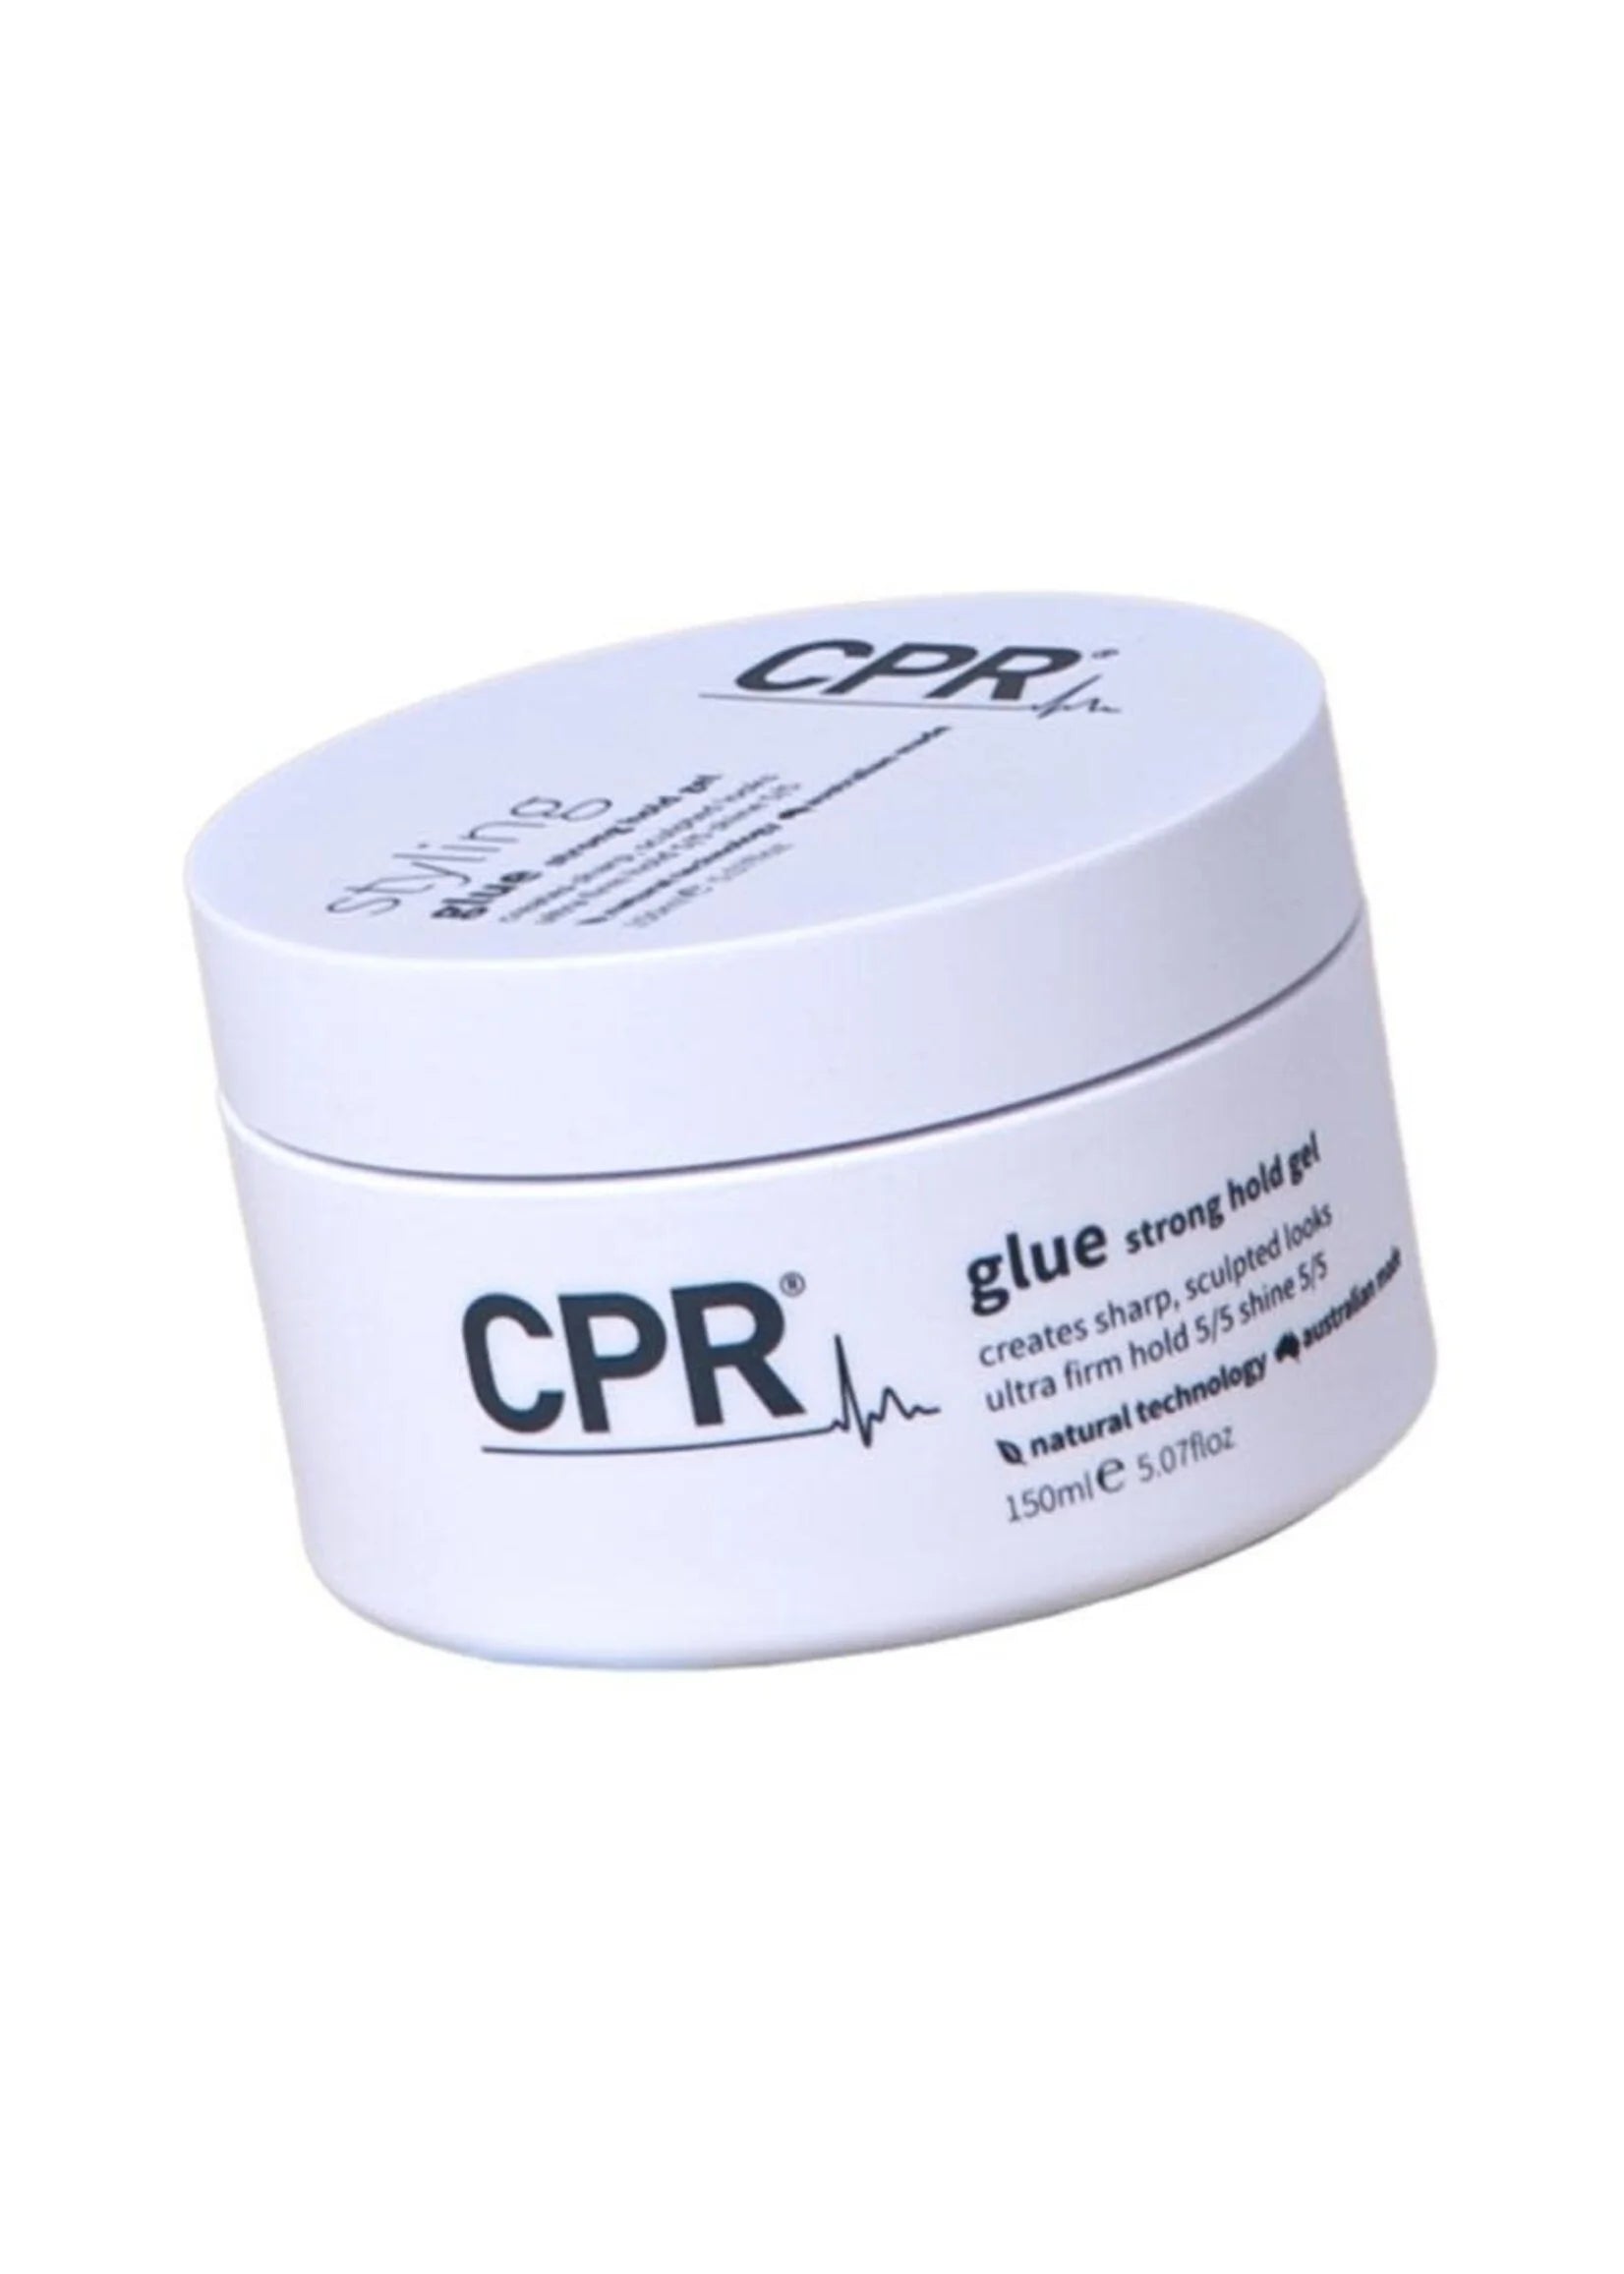 CPR Styling Glue Strong Hold Gel 150ml